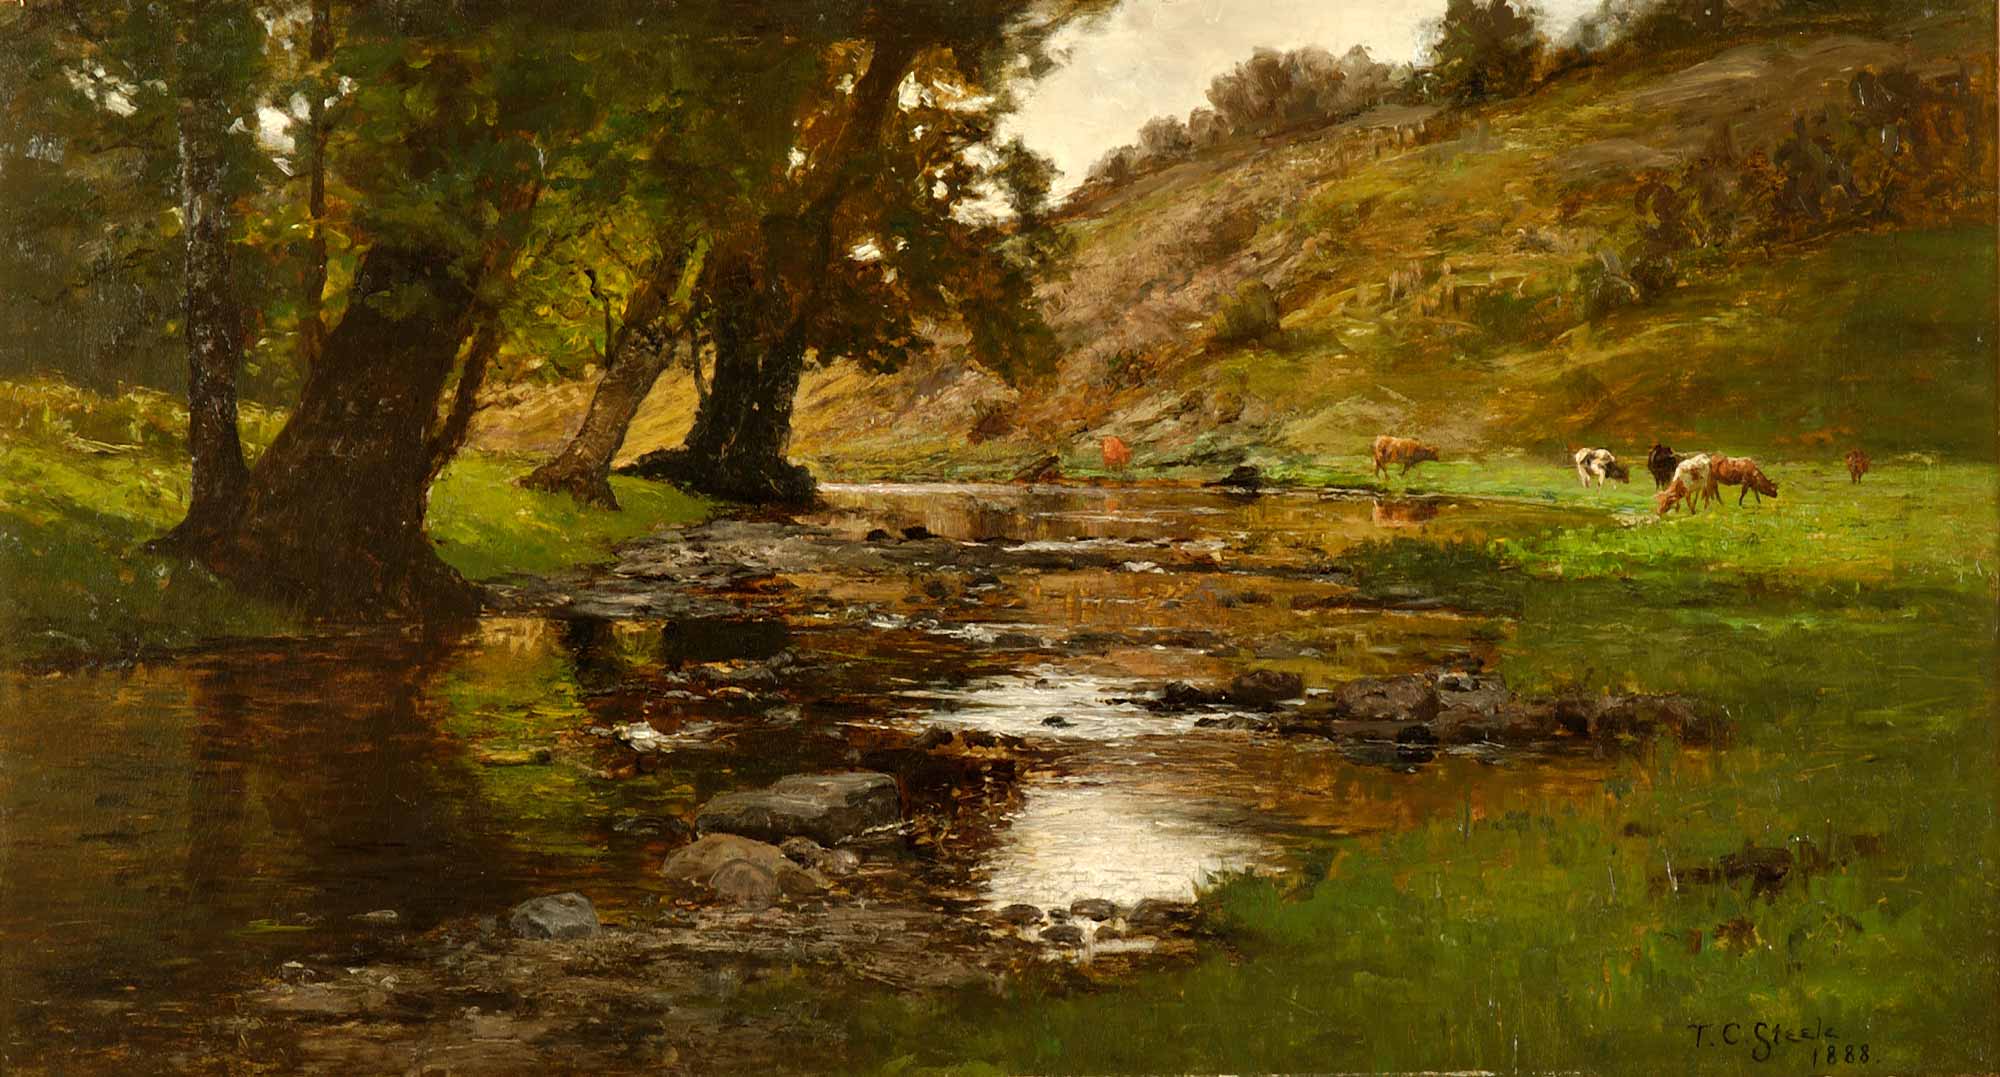 oil on canvas of creek surrounded by green grass and trees with cows grazing nearby